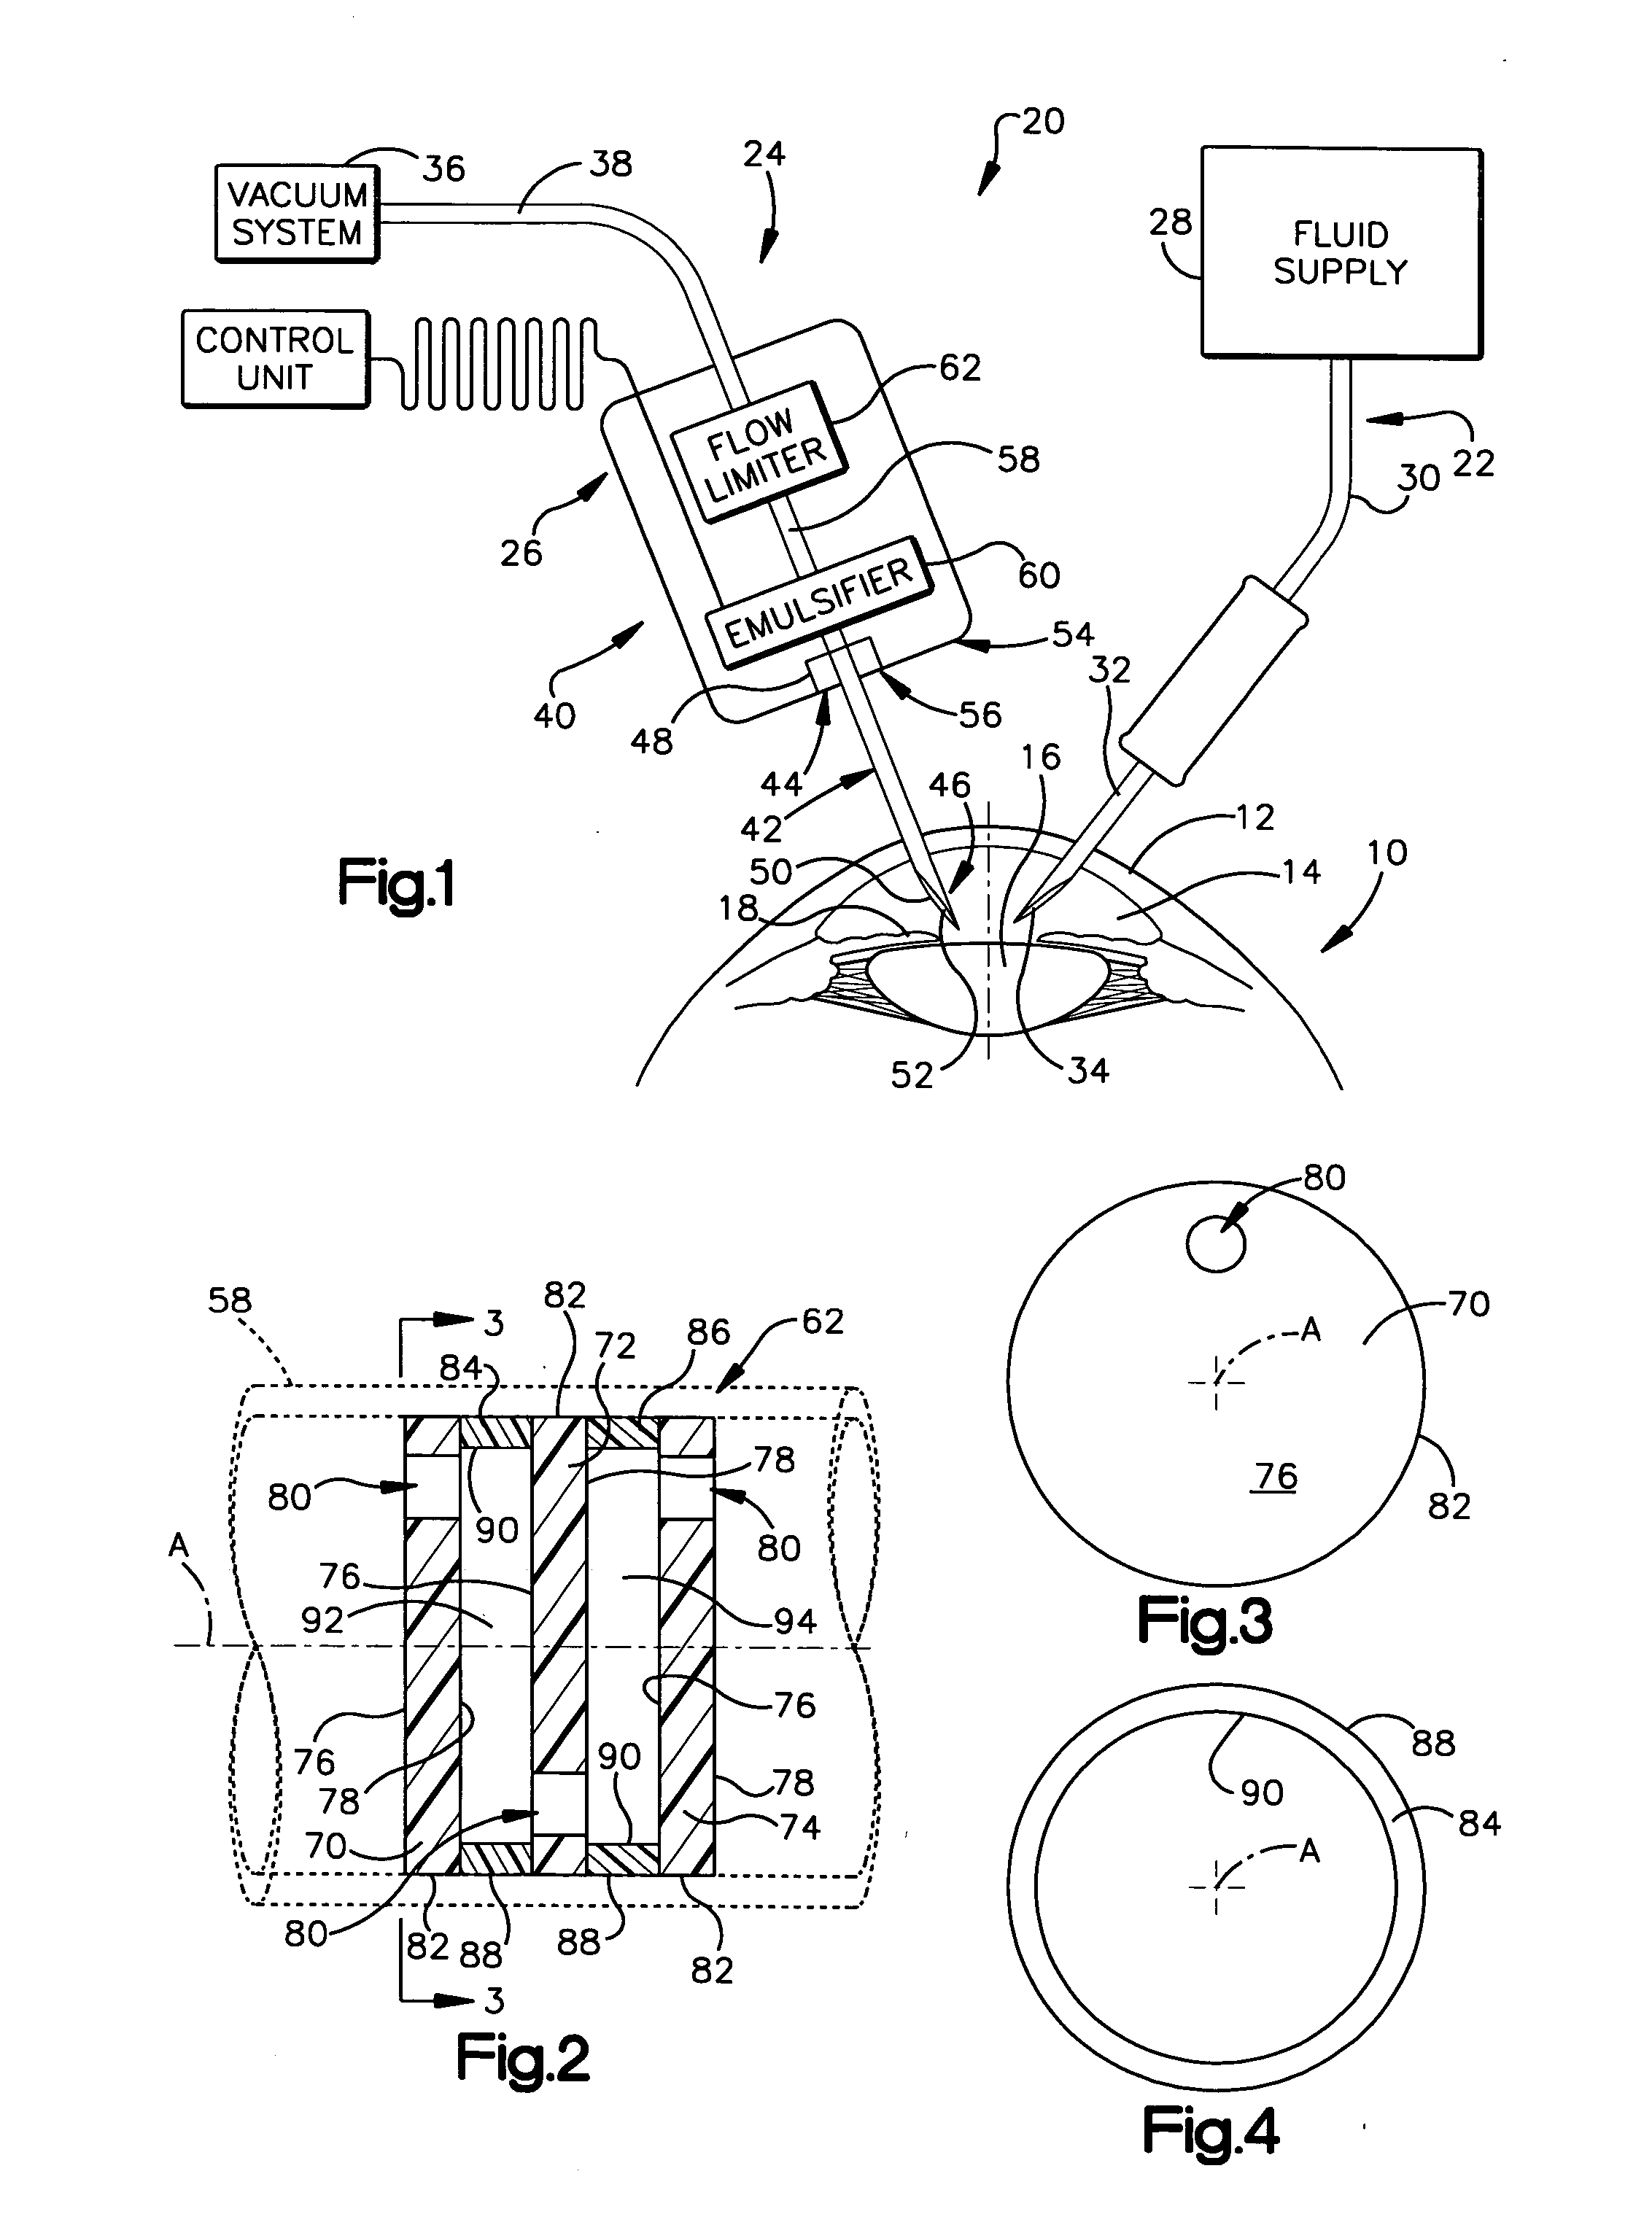 Device for controlling fluid flow in an aspiration system